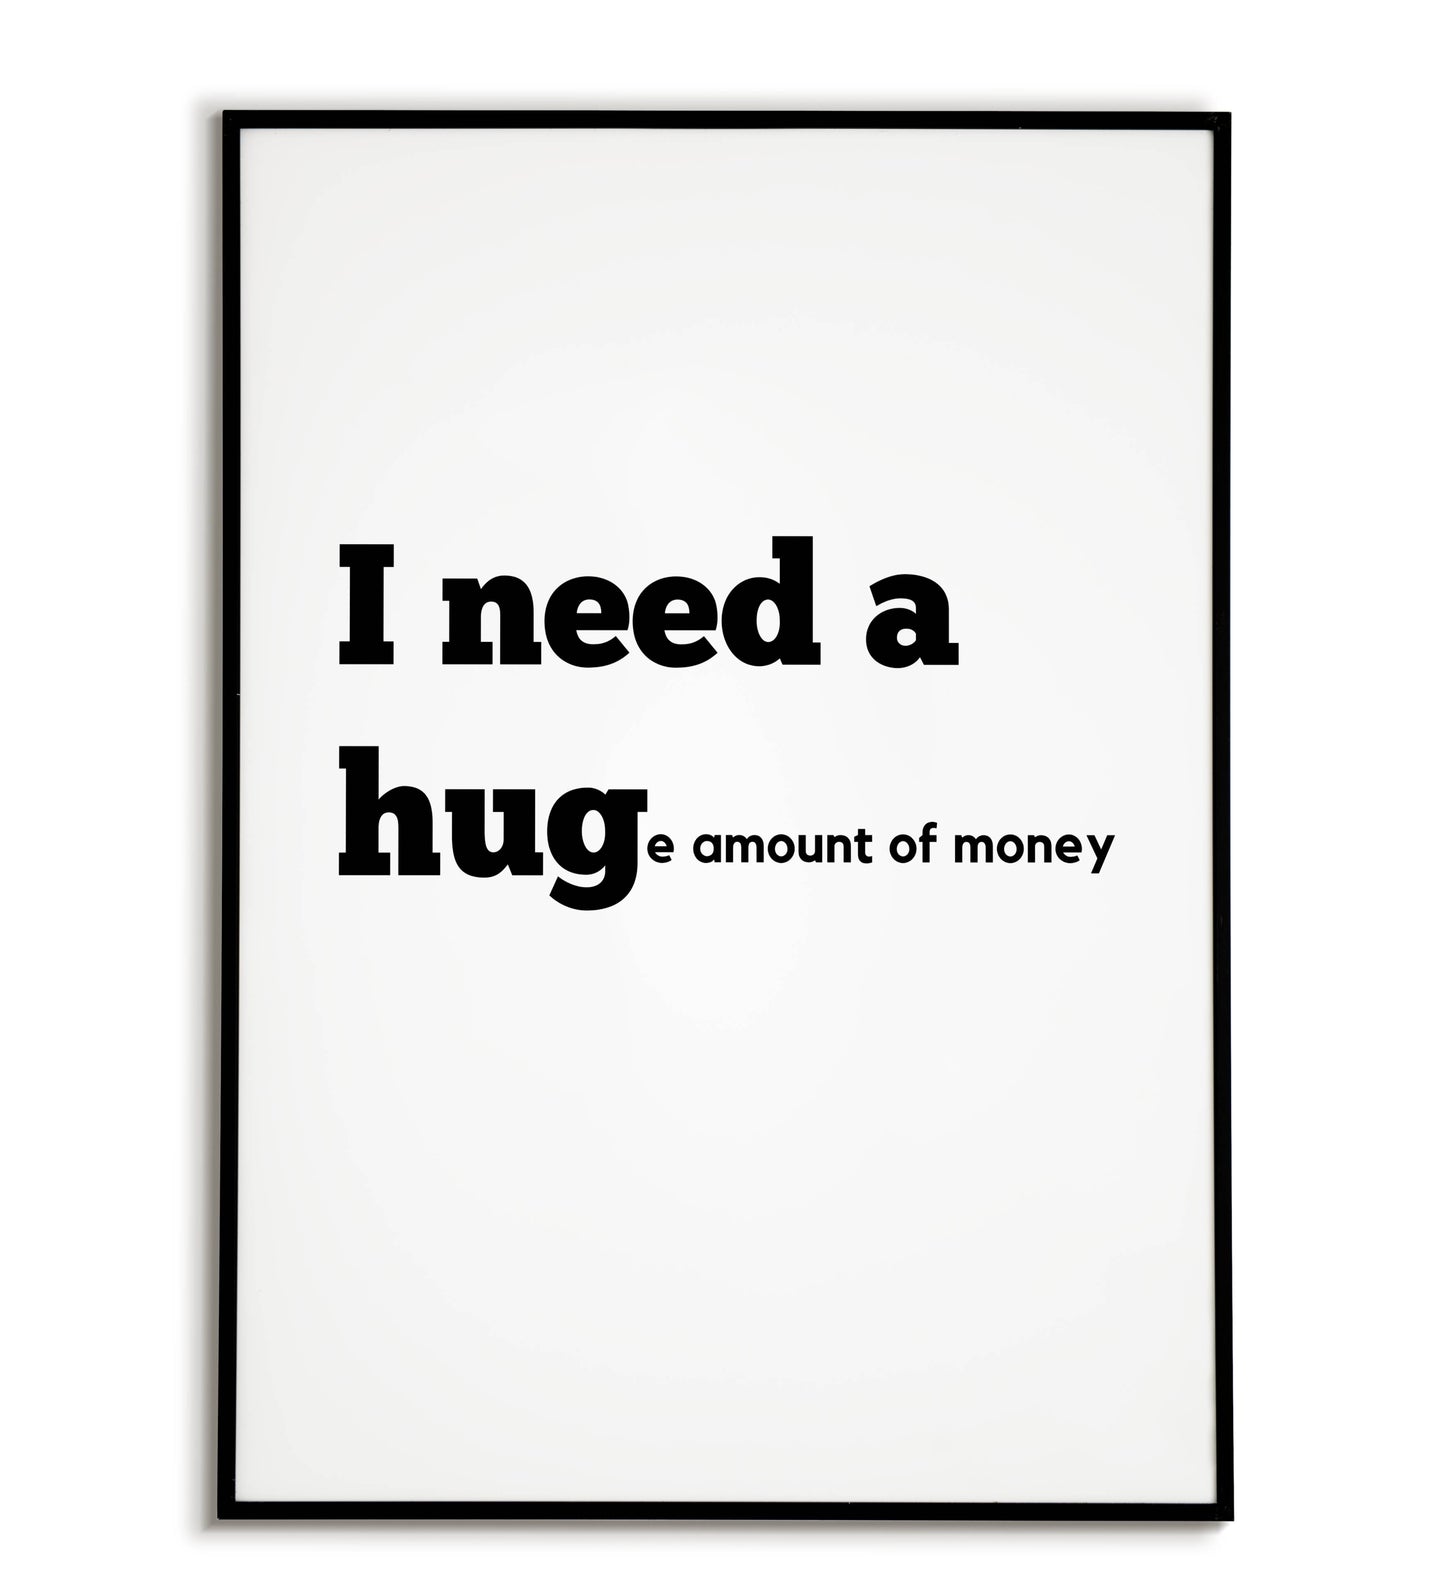 Humorous "I need a huge amount of money" printable poster, relatable for anyone who dreams of financial freedom.	